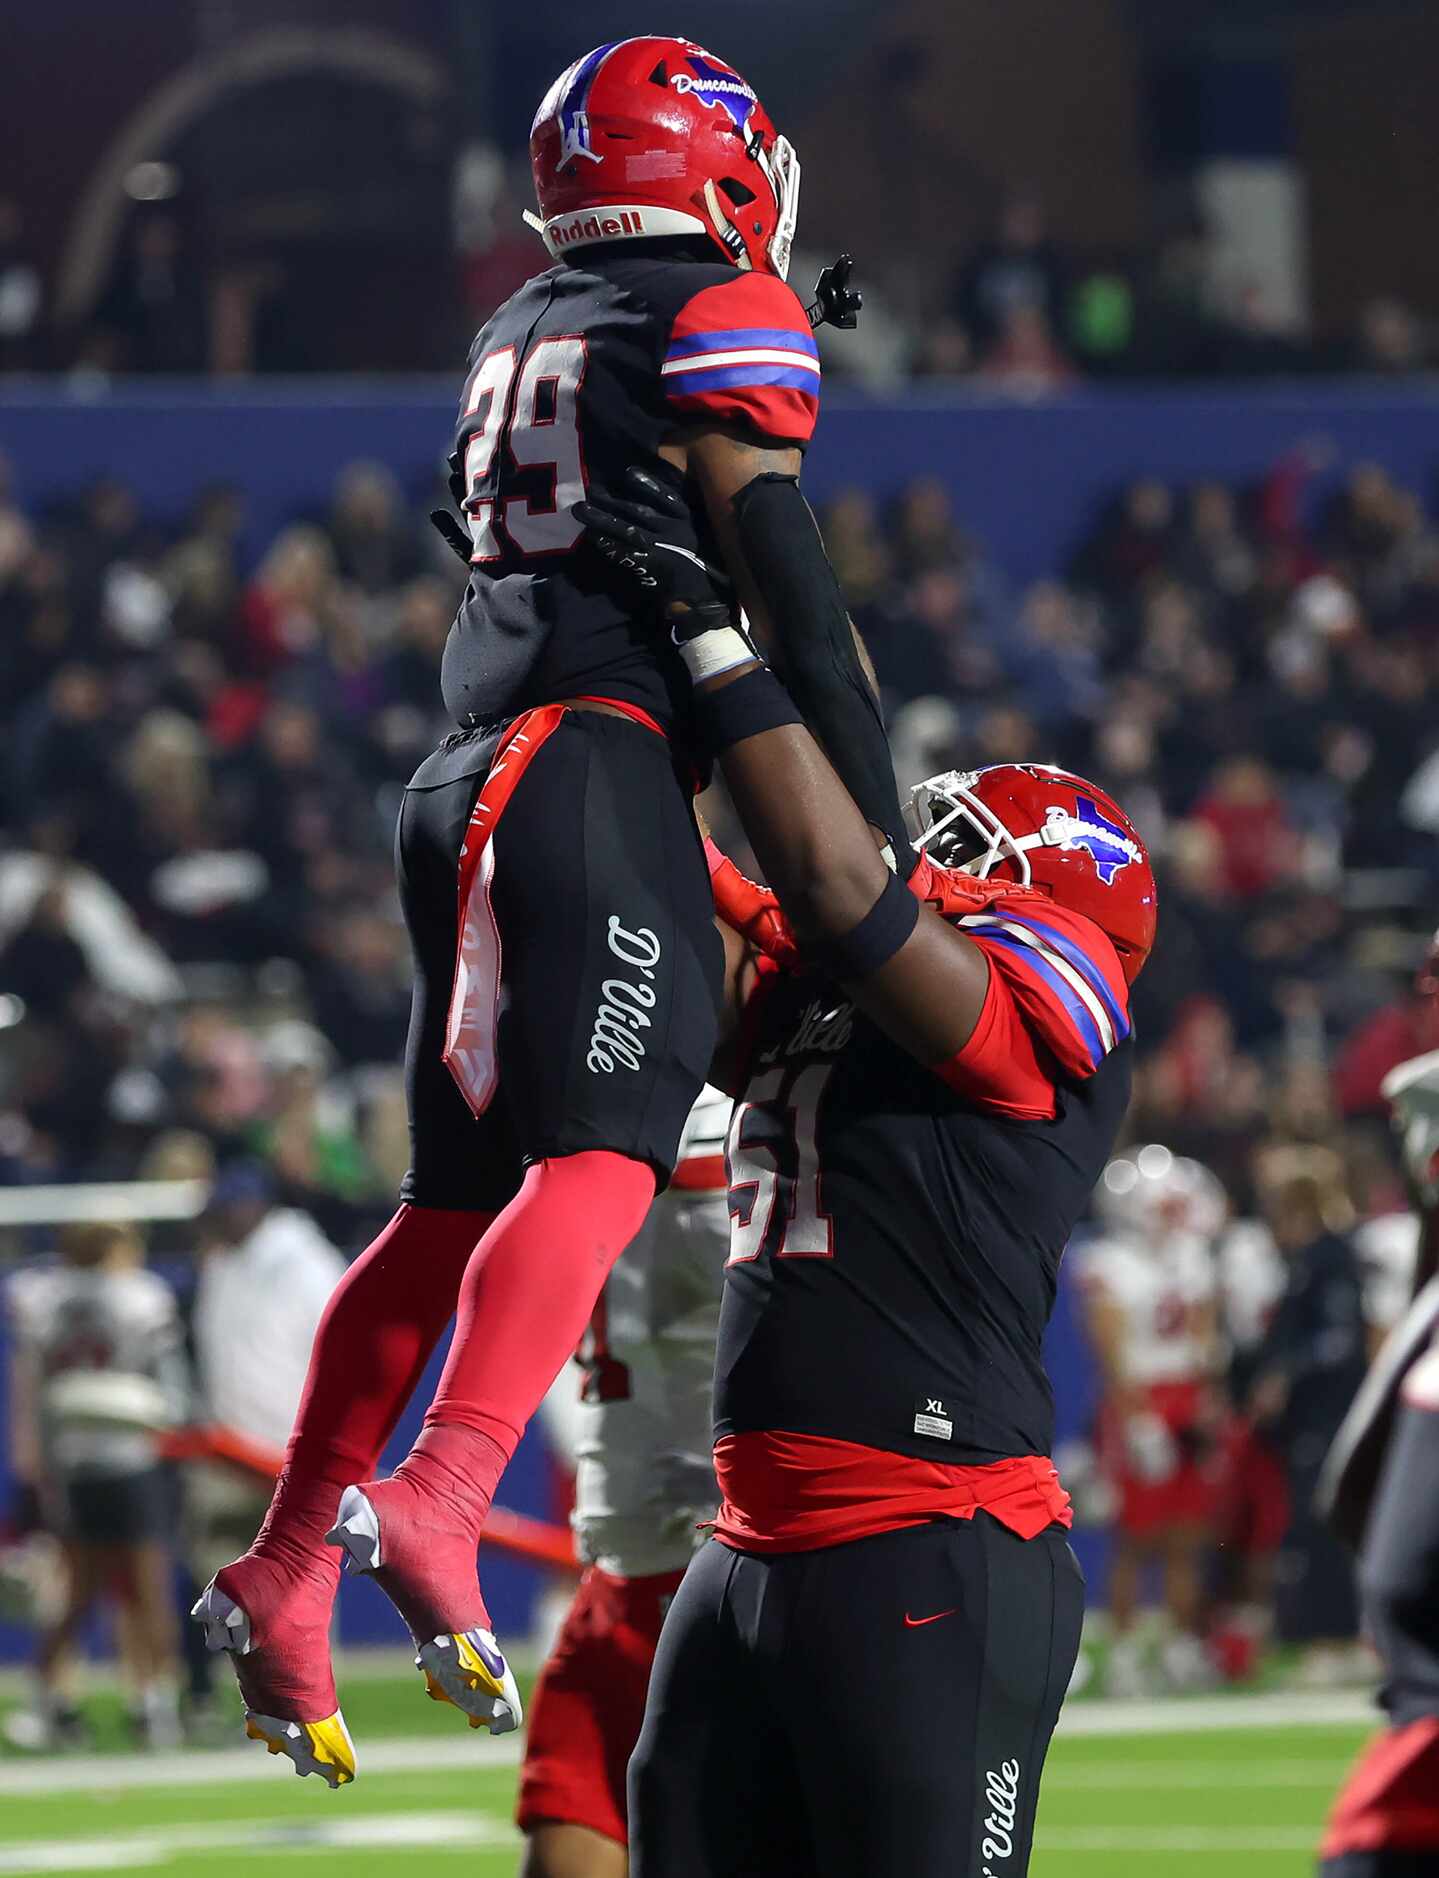 Duncanville running back Caden Durham (29) gets lifted up by offensive lineman Kam Newhouse...